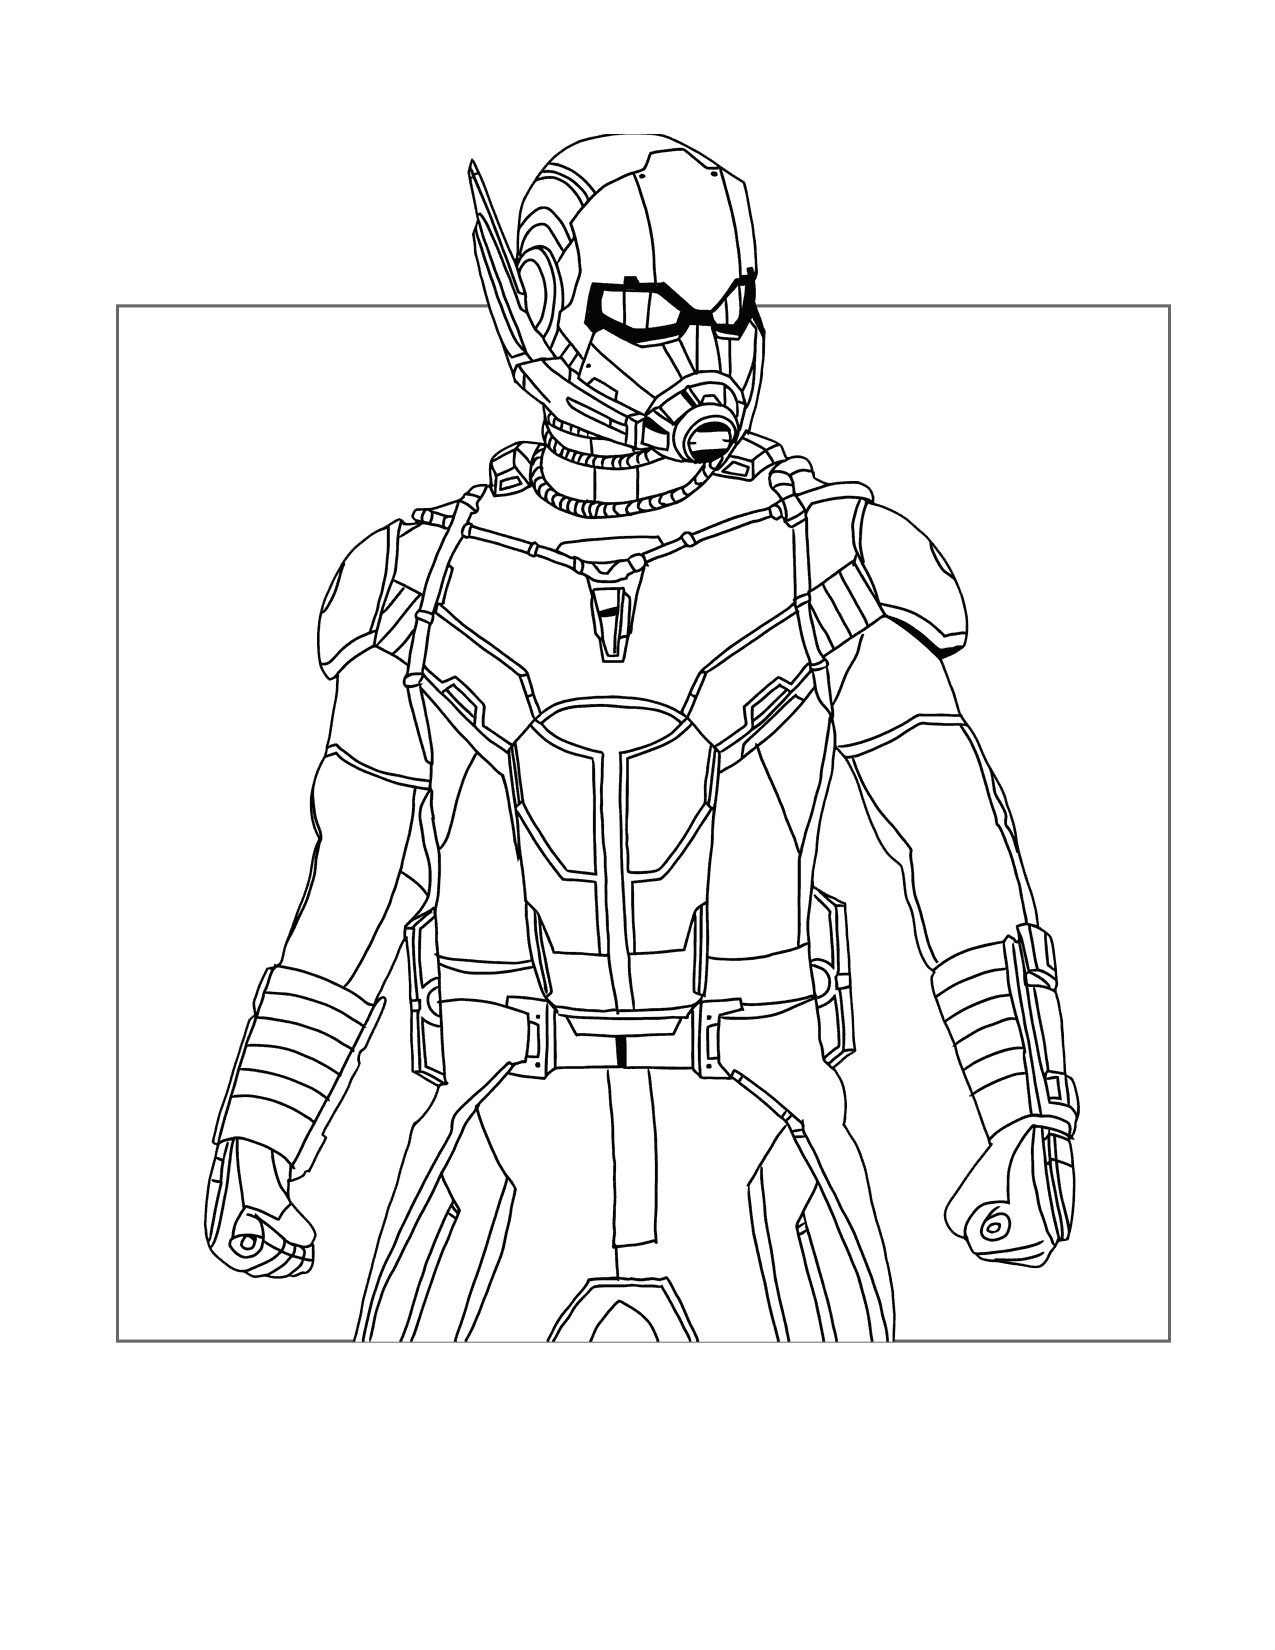 Ant Man Coloring Pages